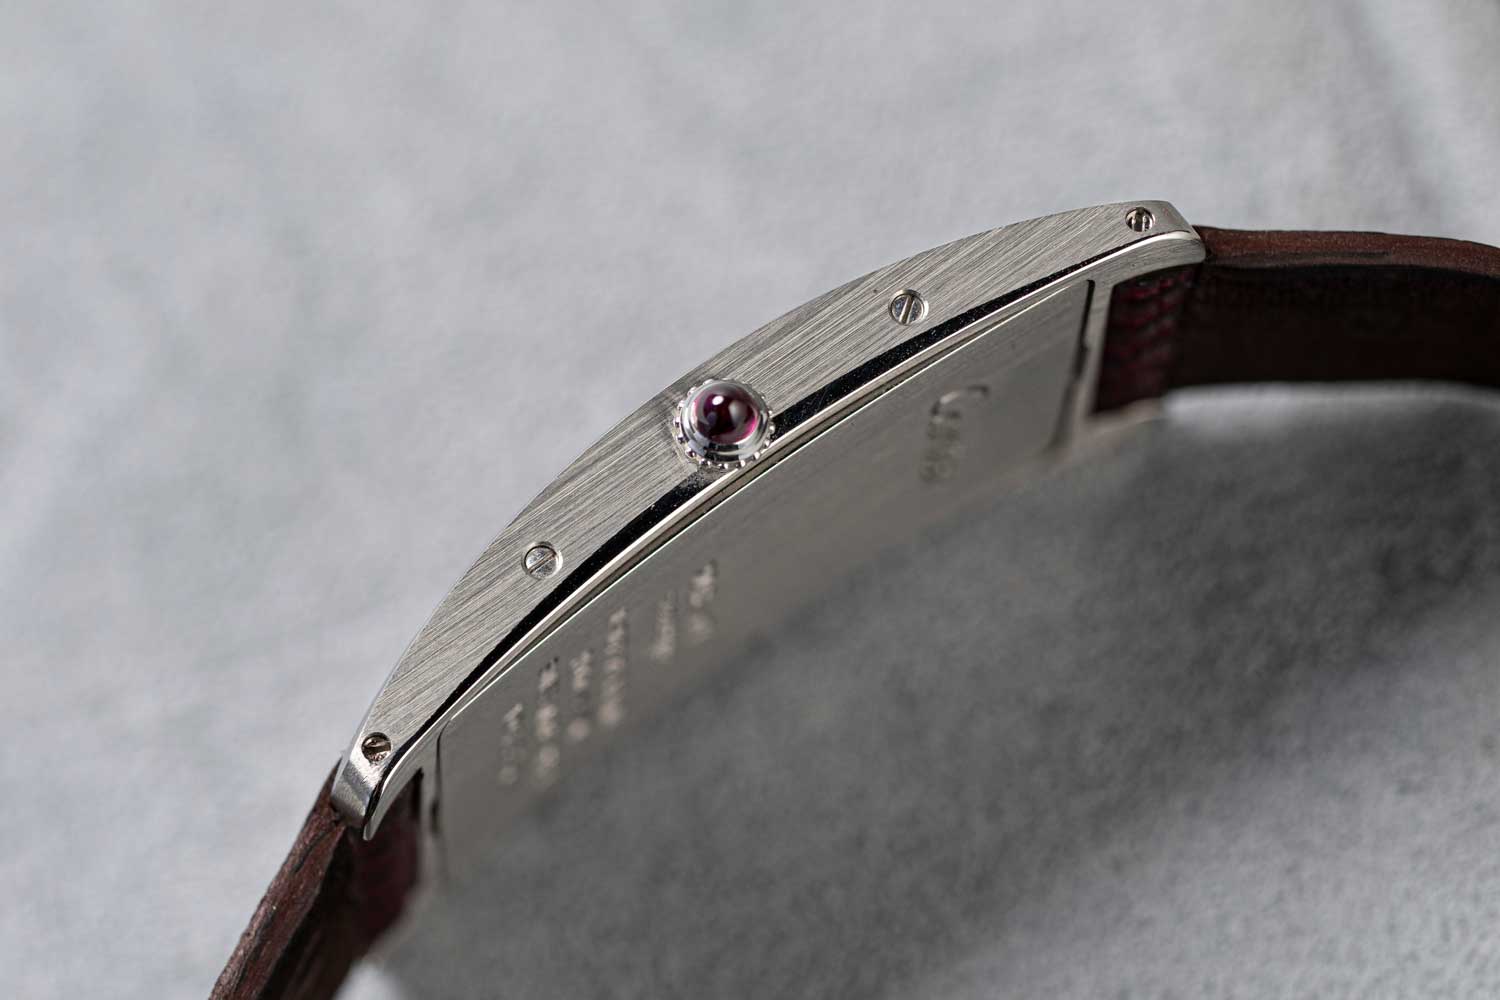 Wei Koh’s special order Cartier Tank Cintrée in platinum with a salmon dial and burgundy Roman numerals, fitted on a burgundy lizard strap made by Federico De Peppo of Huitcinq1988 (©Revolution)